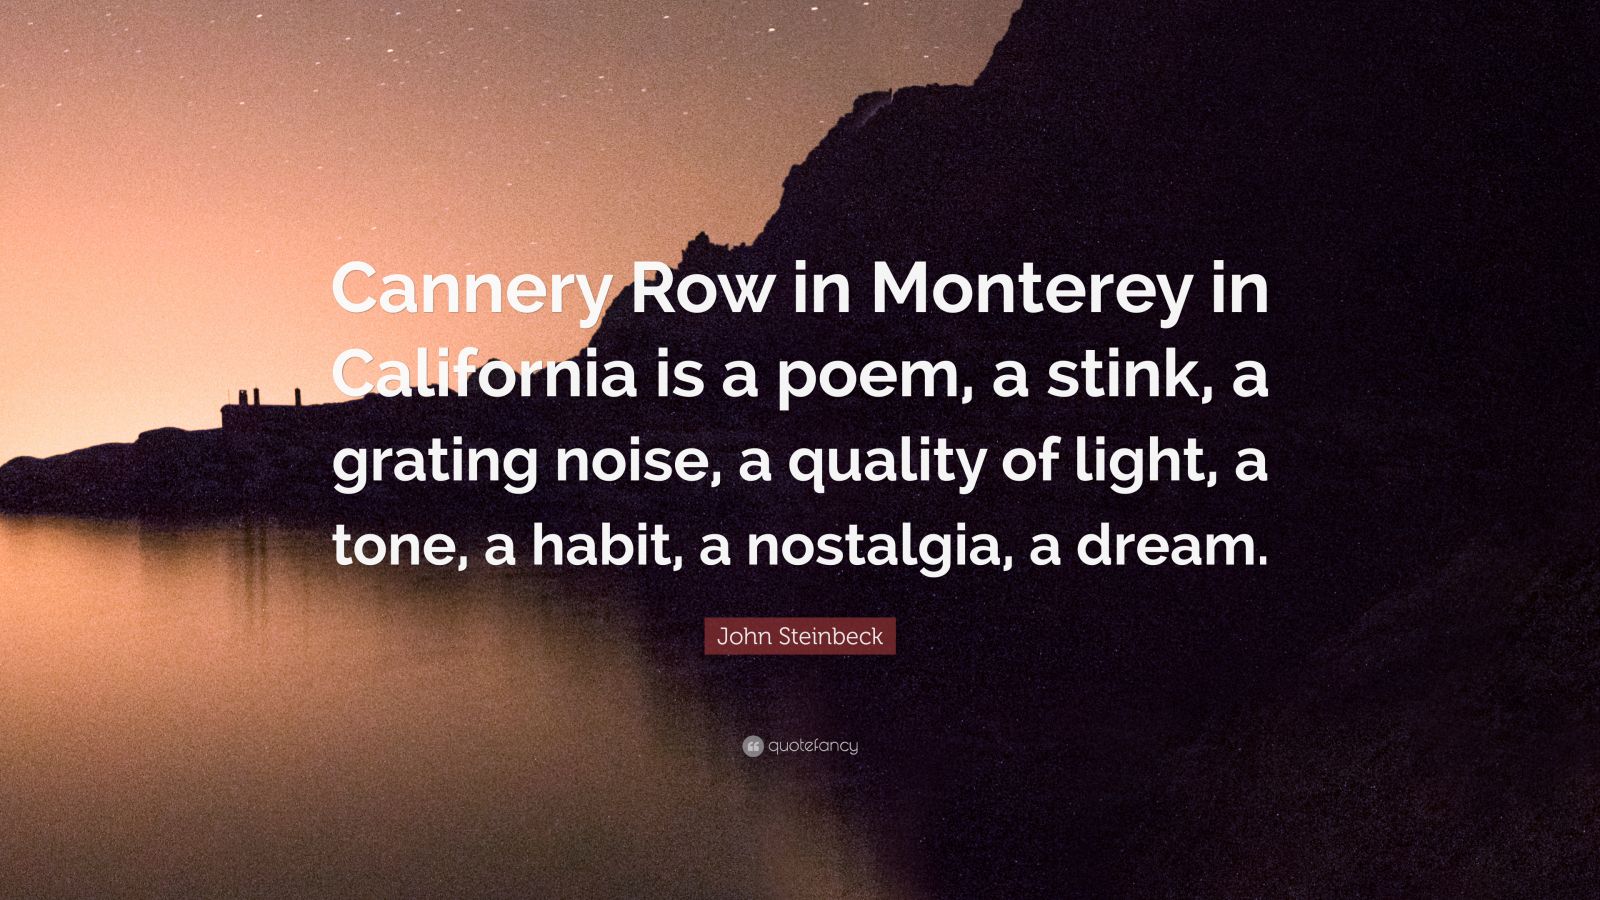 cannery row in monterey in california is a poem